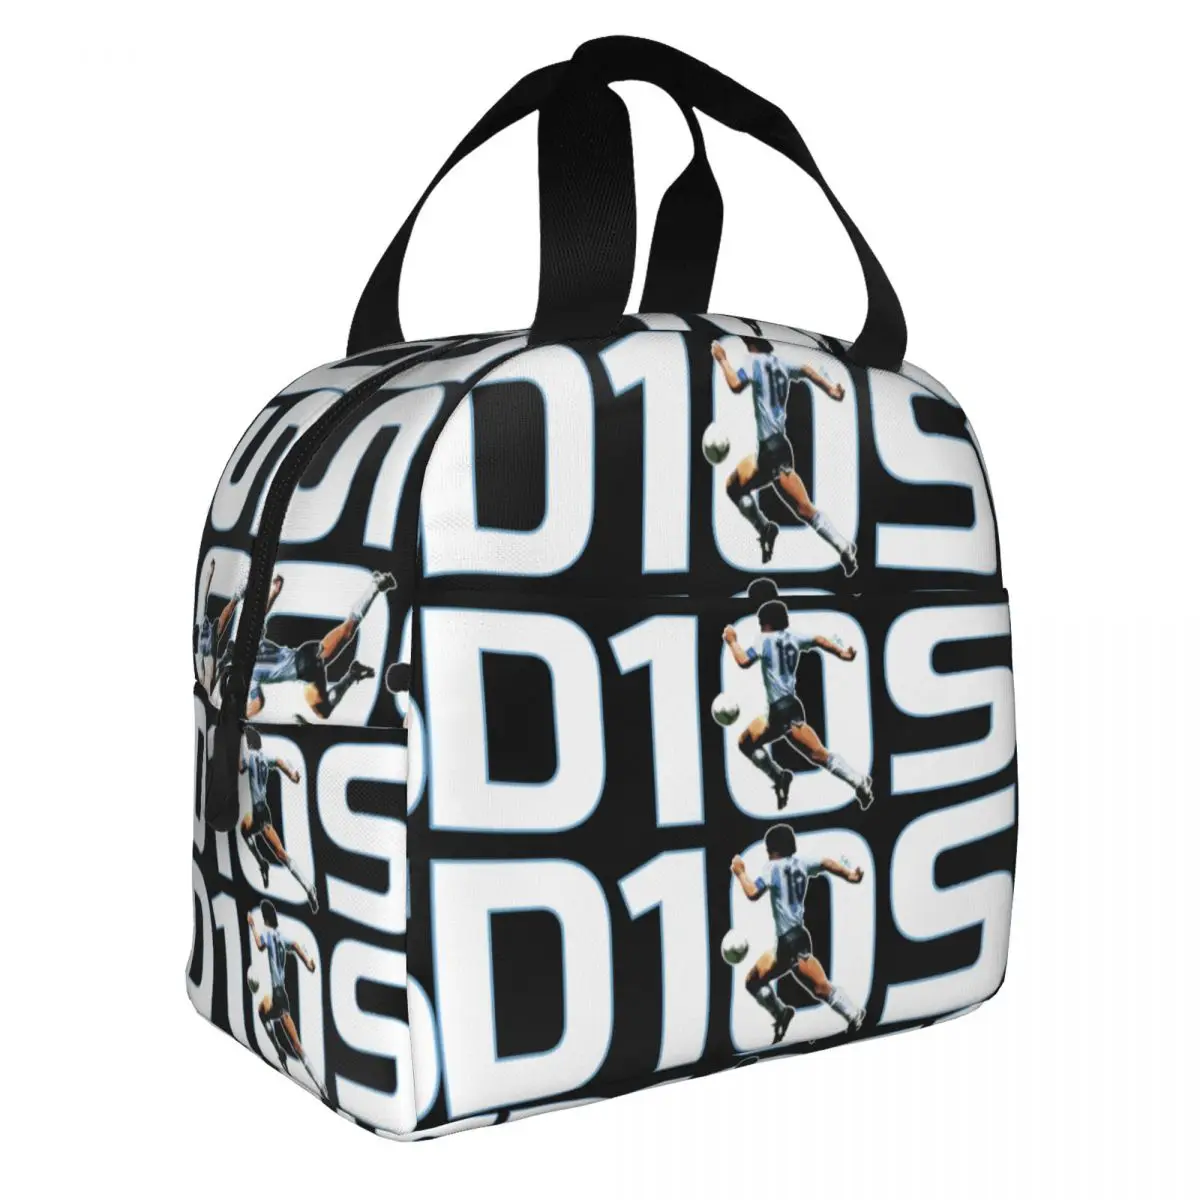 

D10S Insulated Lunch Bags Cooler Bag Lunch Container Diego Armando Maradona Argentina Football Legend Lunch Box Tote Food Bag